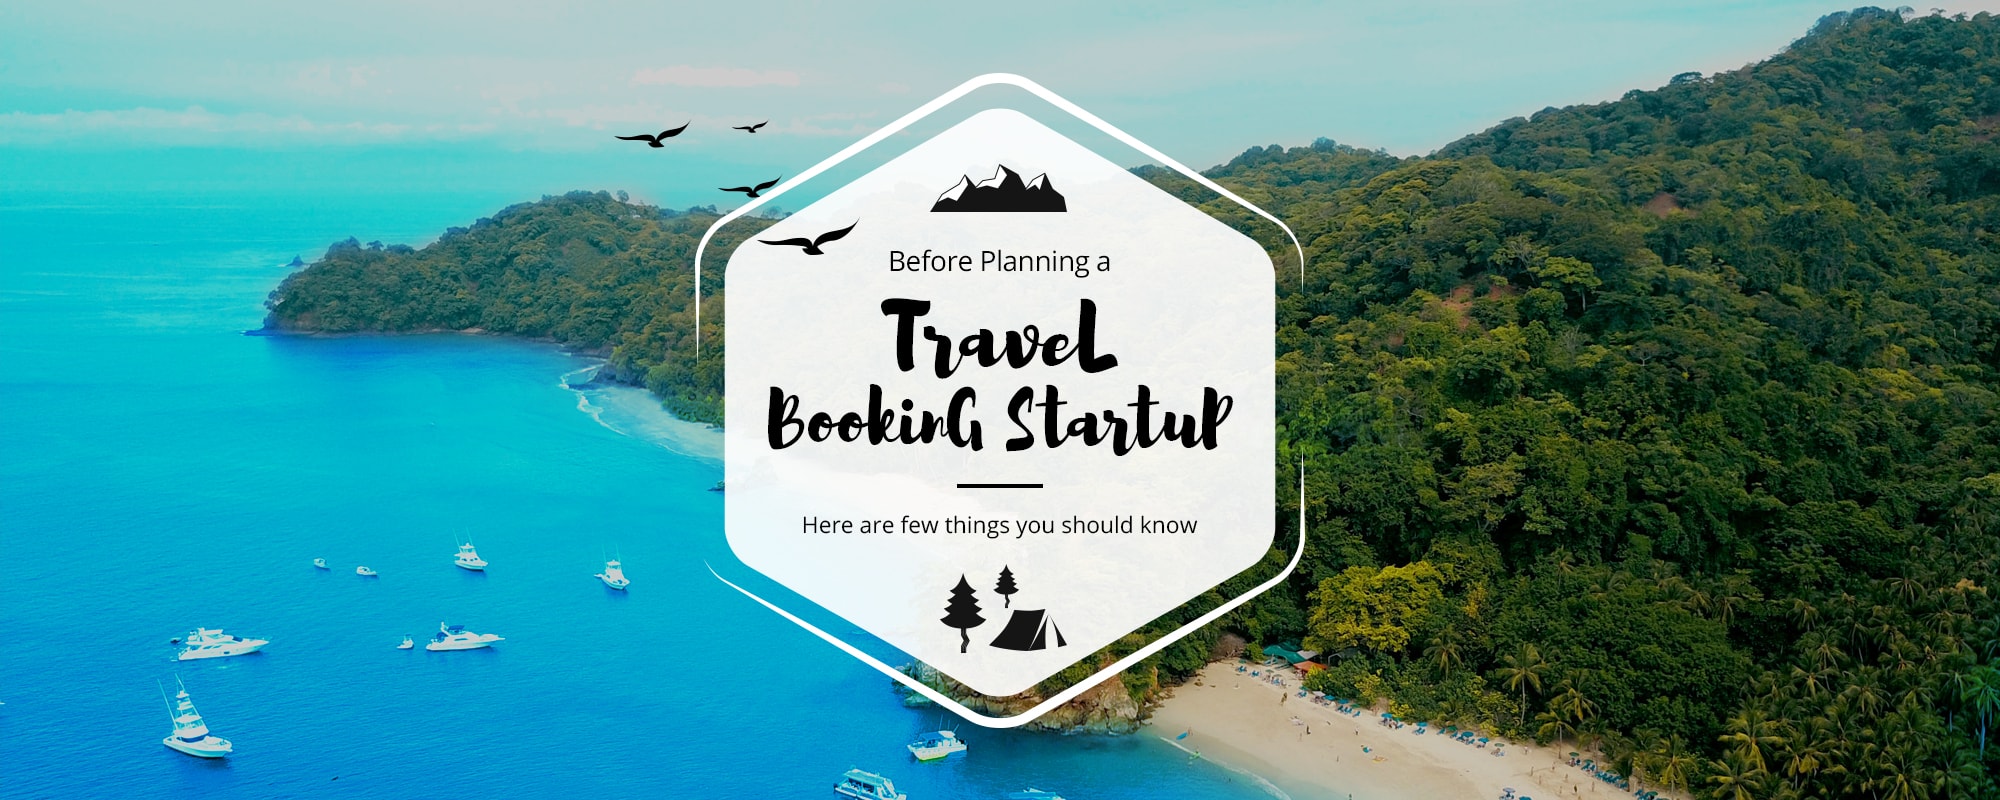 Planning to launch a travel booking startup in India? Here is what you need to know